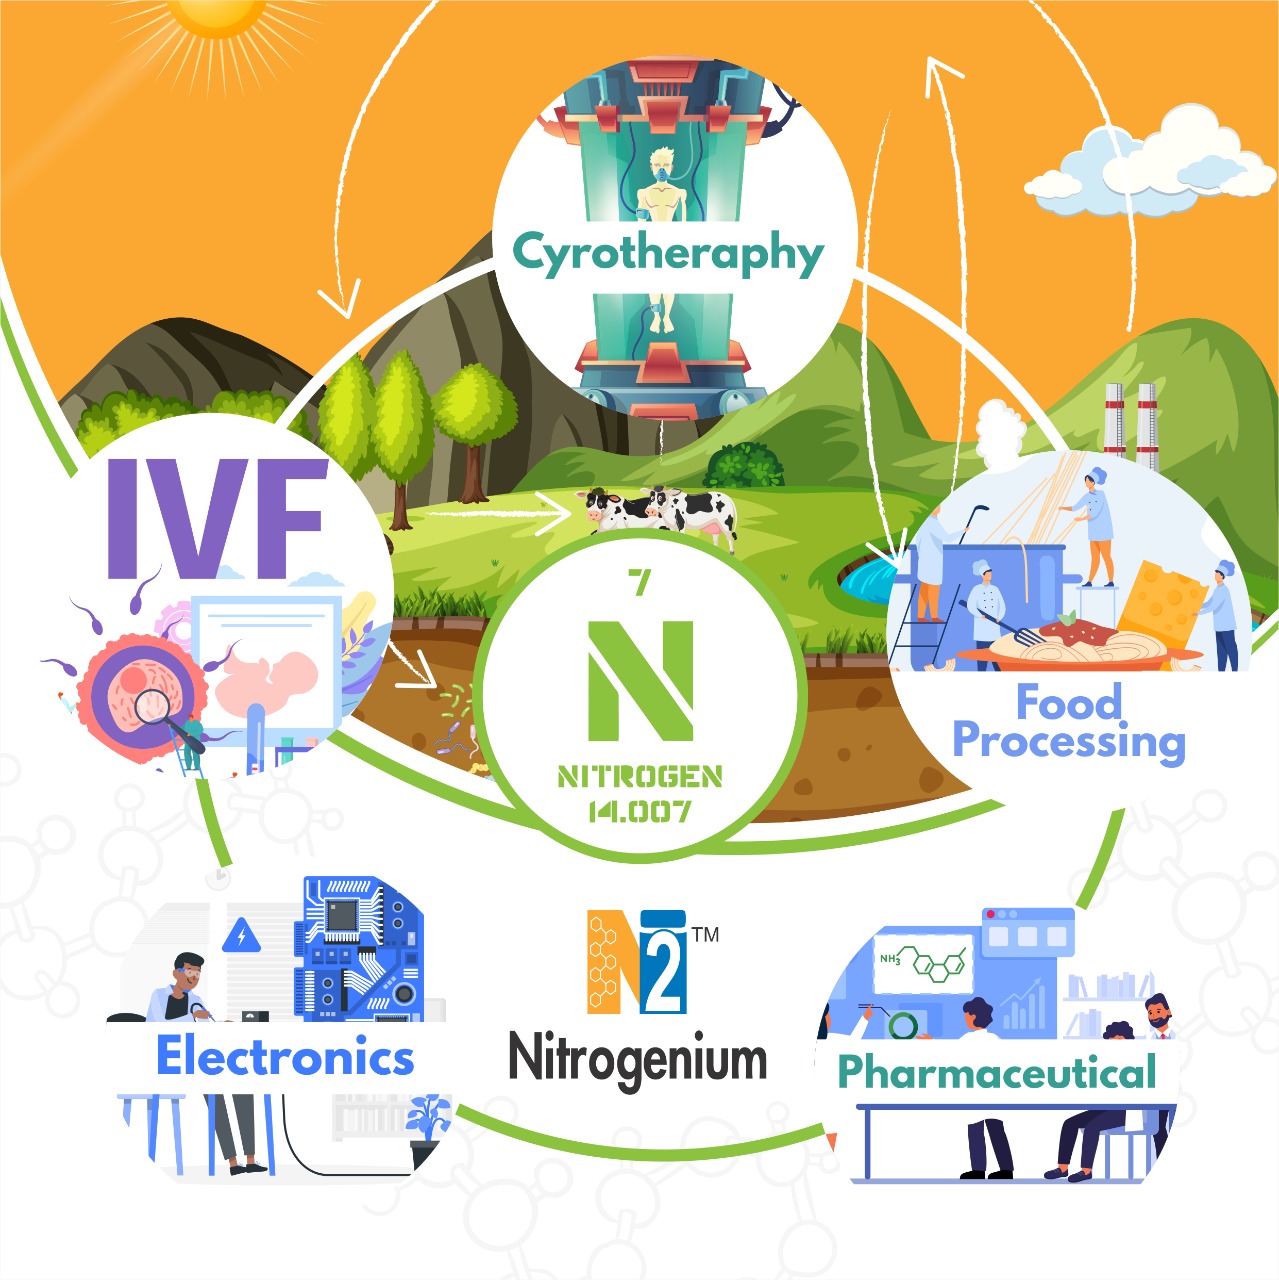 NITROGEN AND ITS VARIOUS FORMS AND APPLICATIONS IN DIFFERENT INDUSTRIES